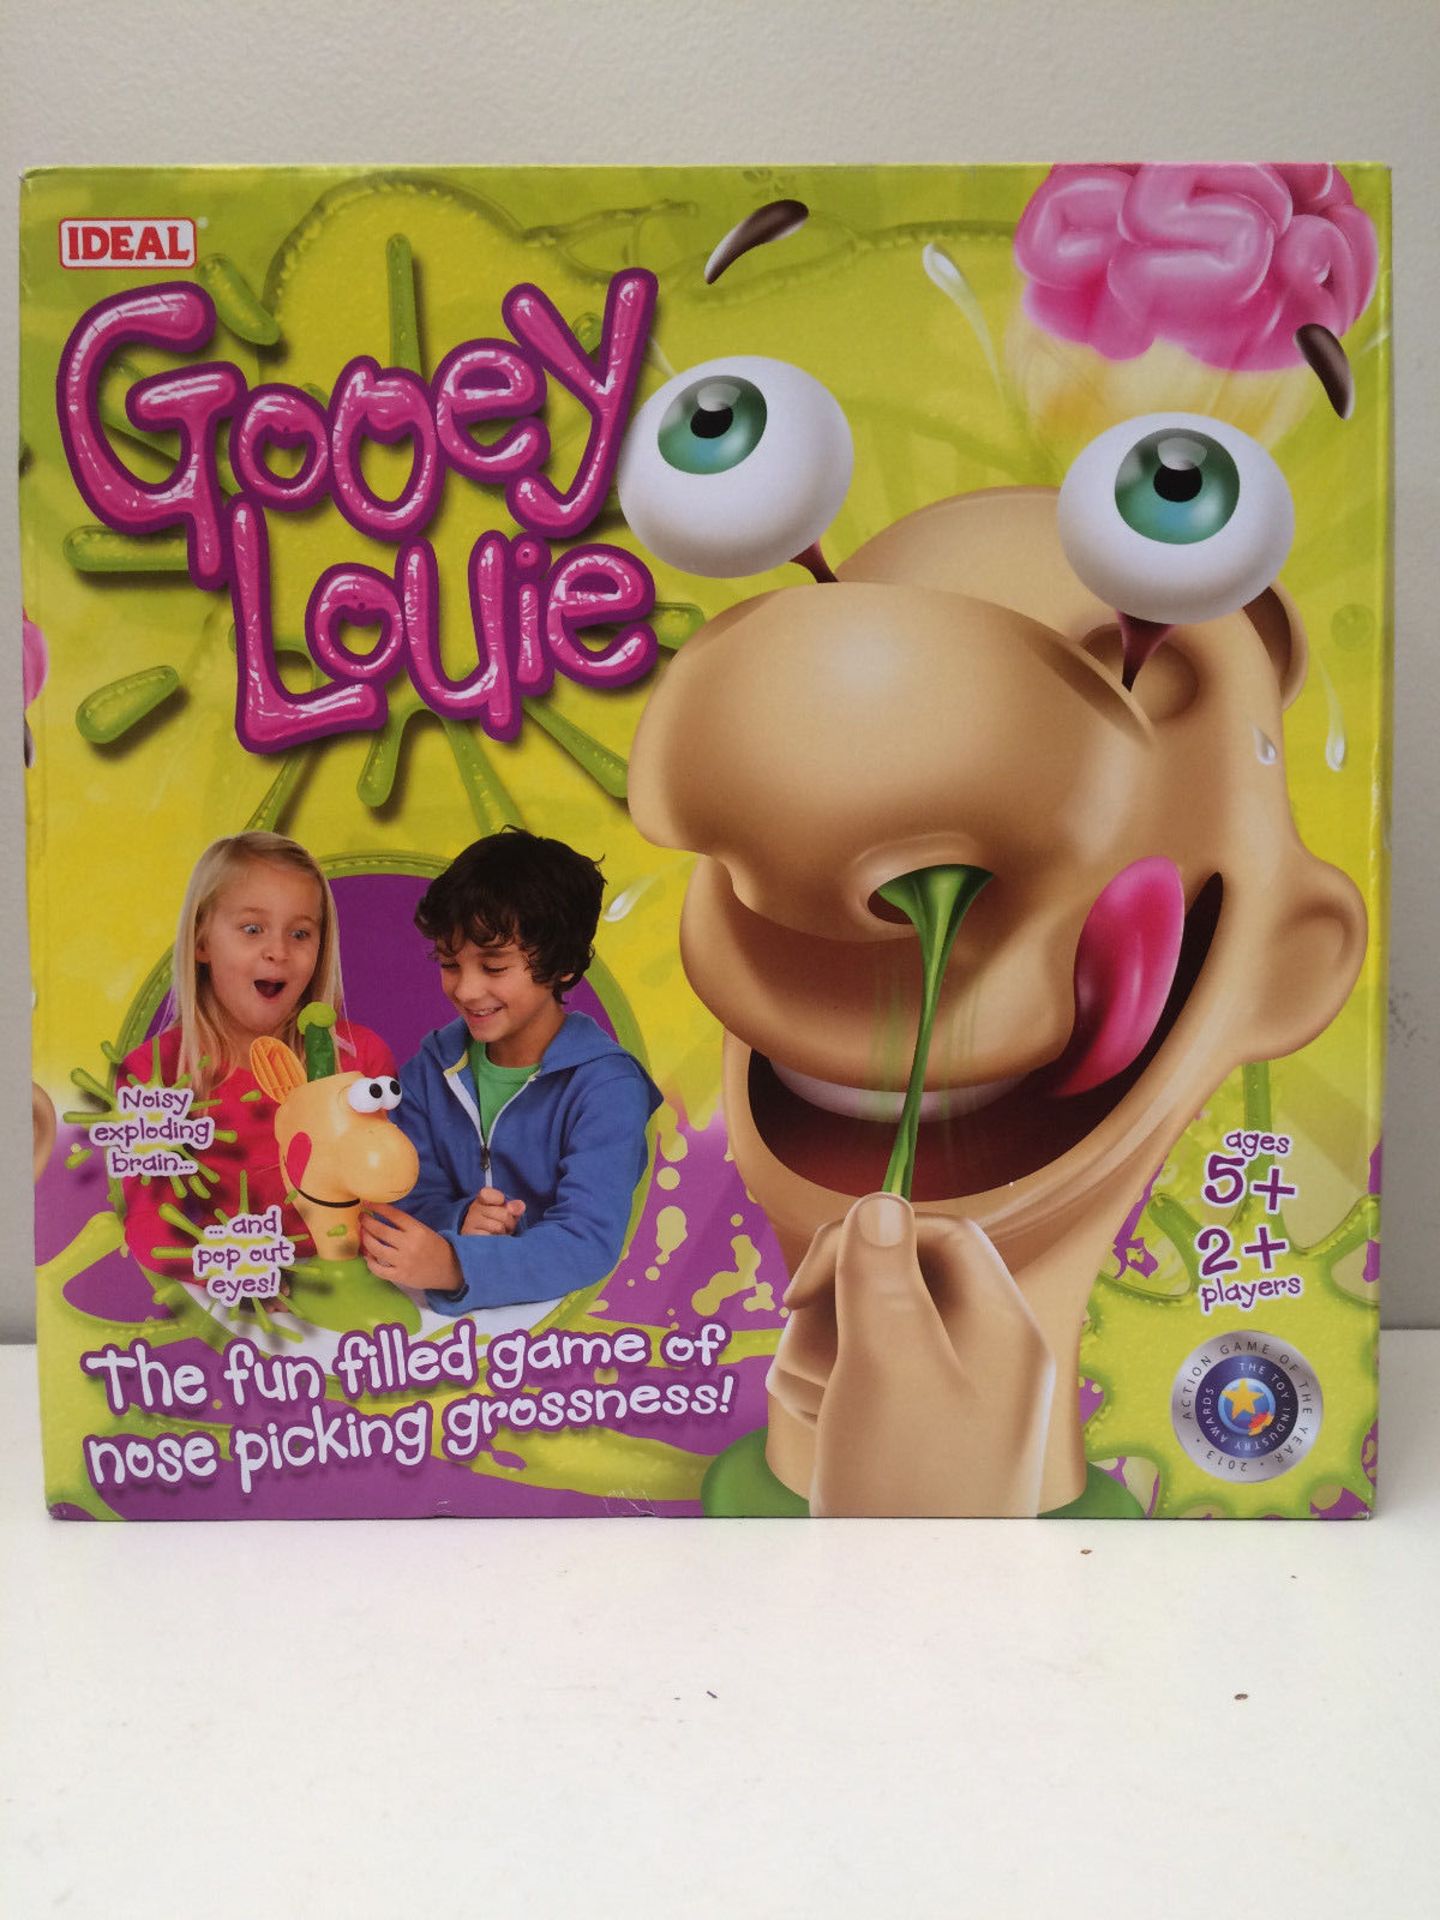 129 x Family Games & Toys products as listed | RRP £ 2381.62 - Image 3 of 11